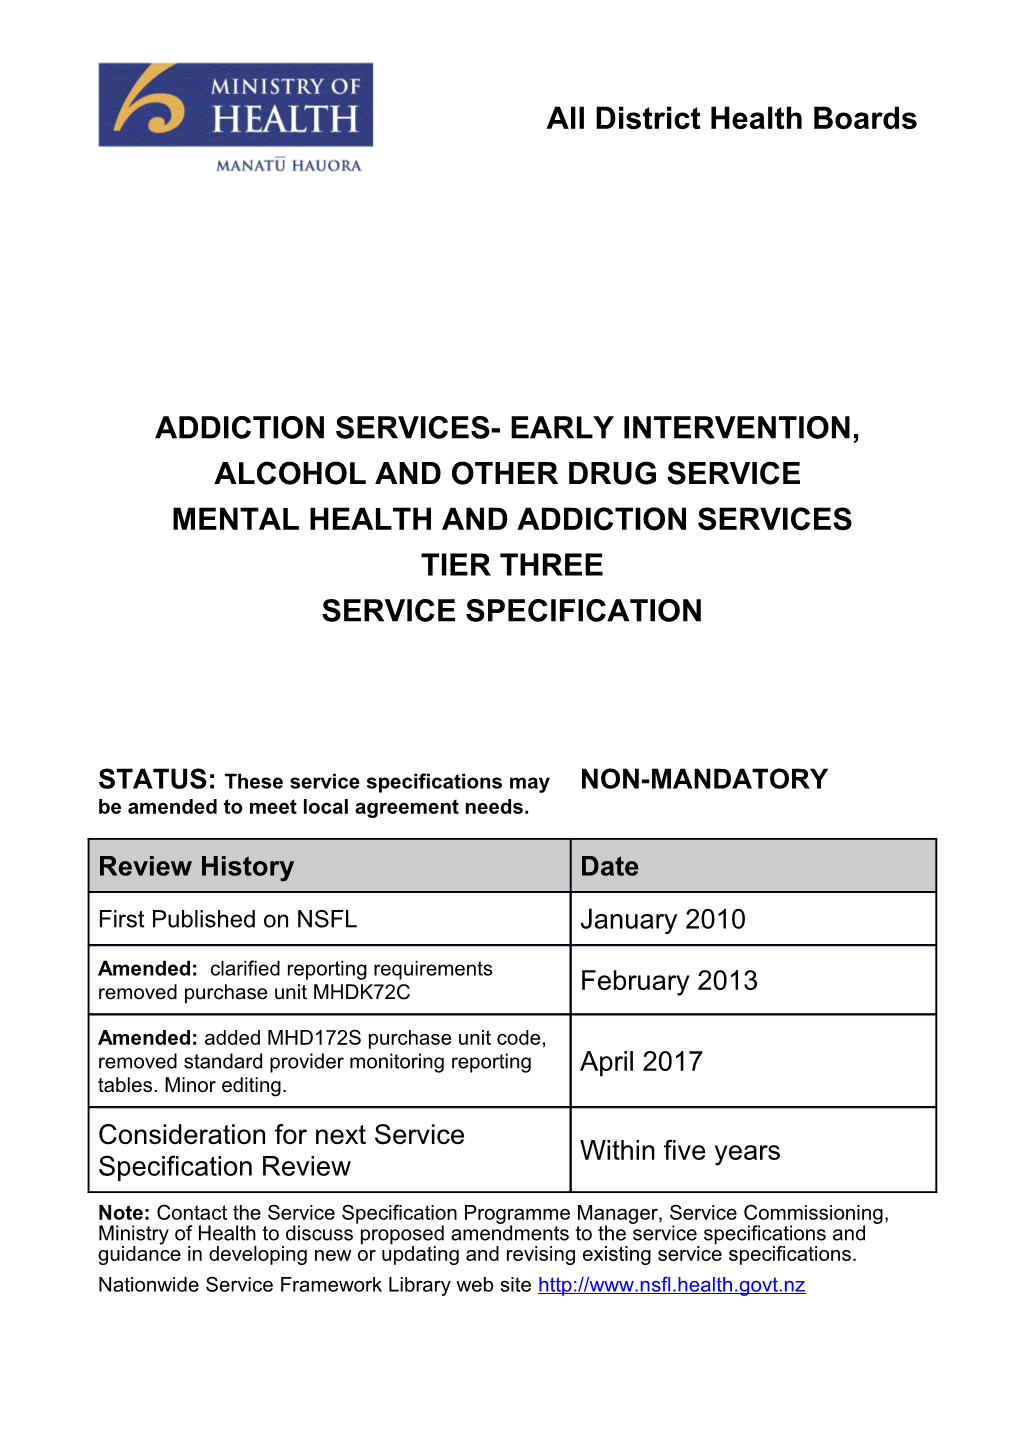 Early Intervention Alcohol and Other Drug Service